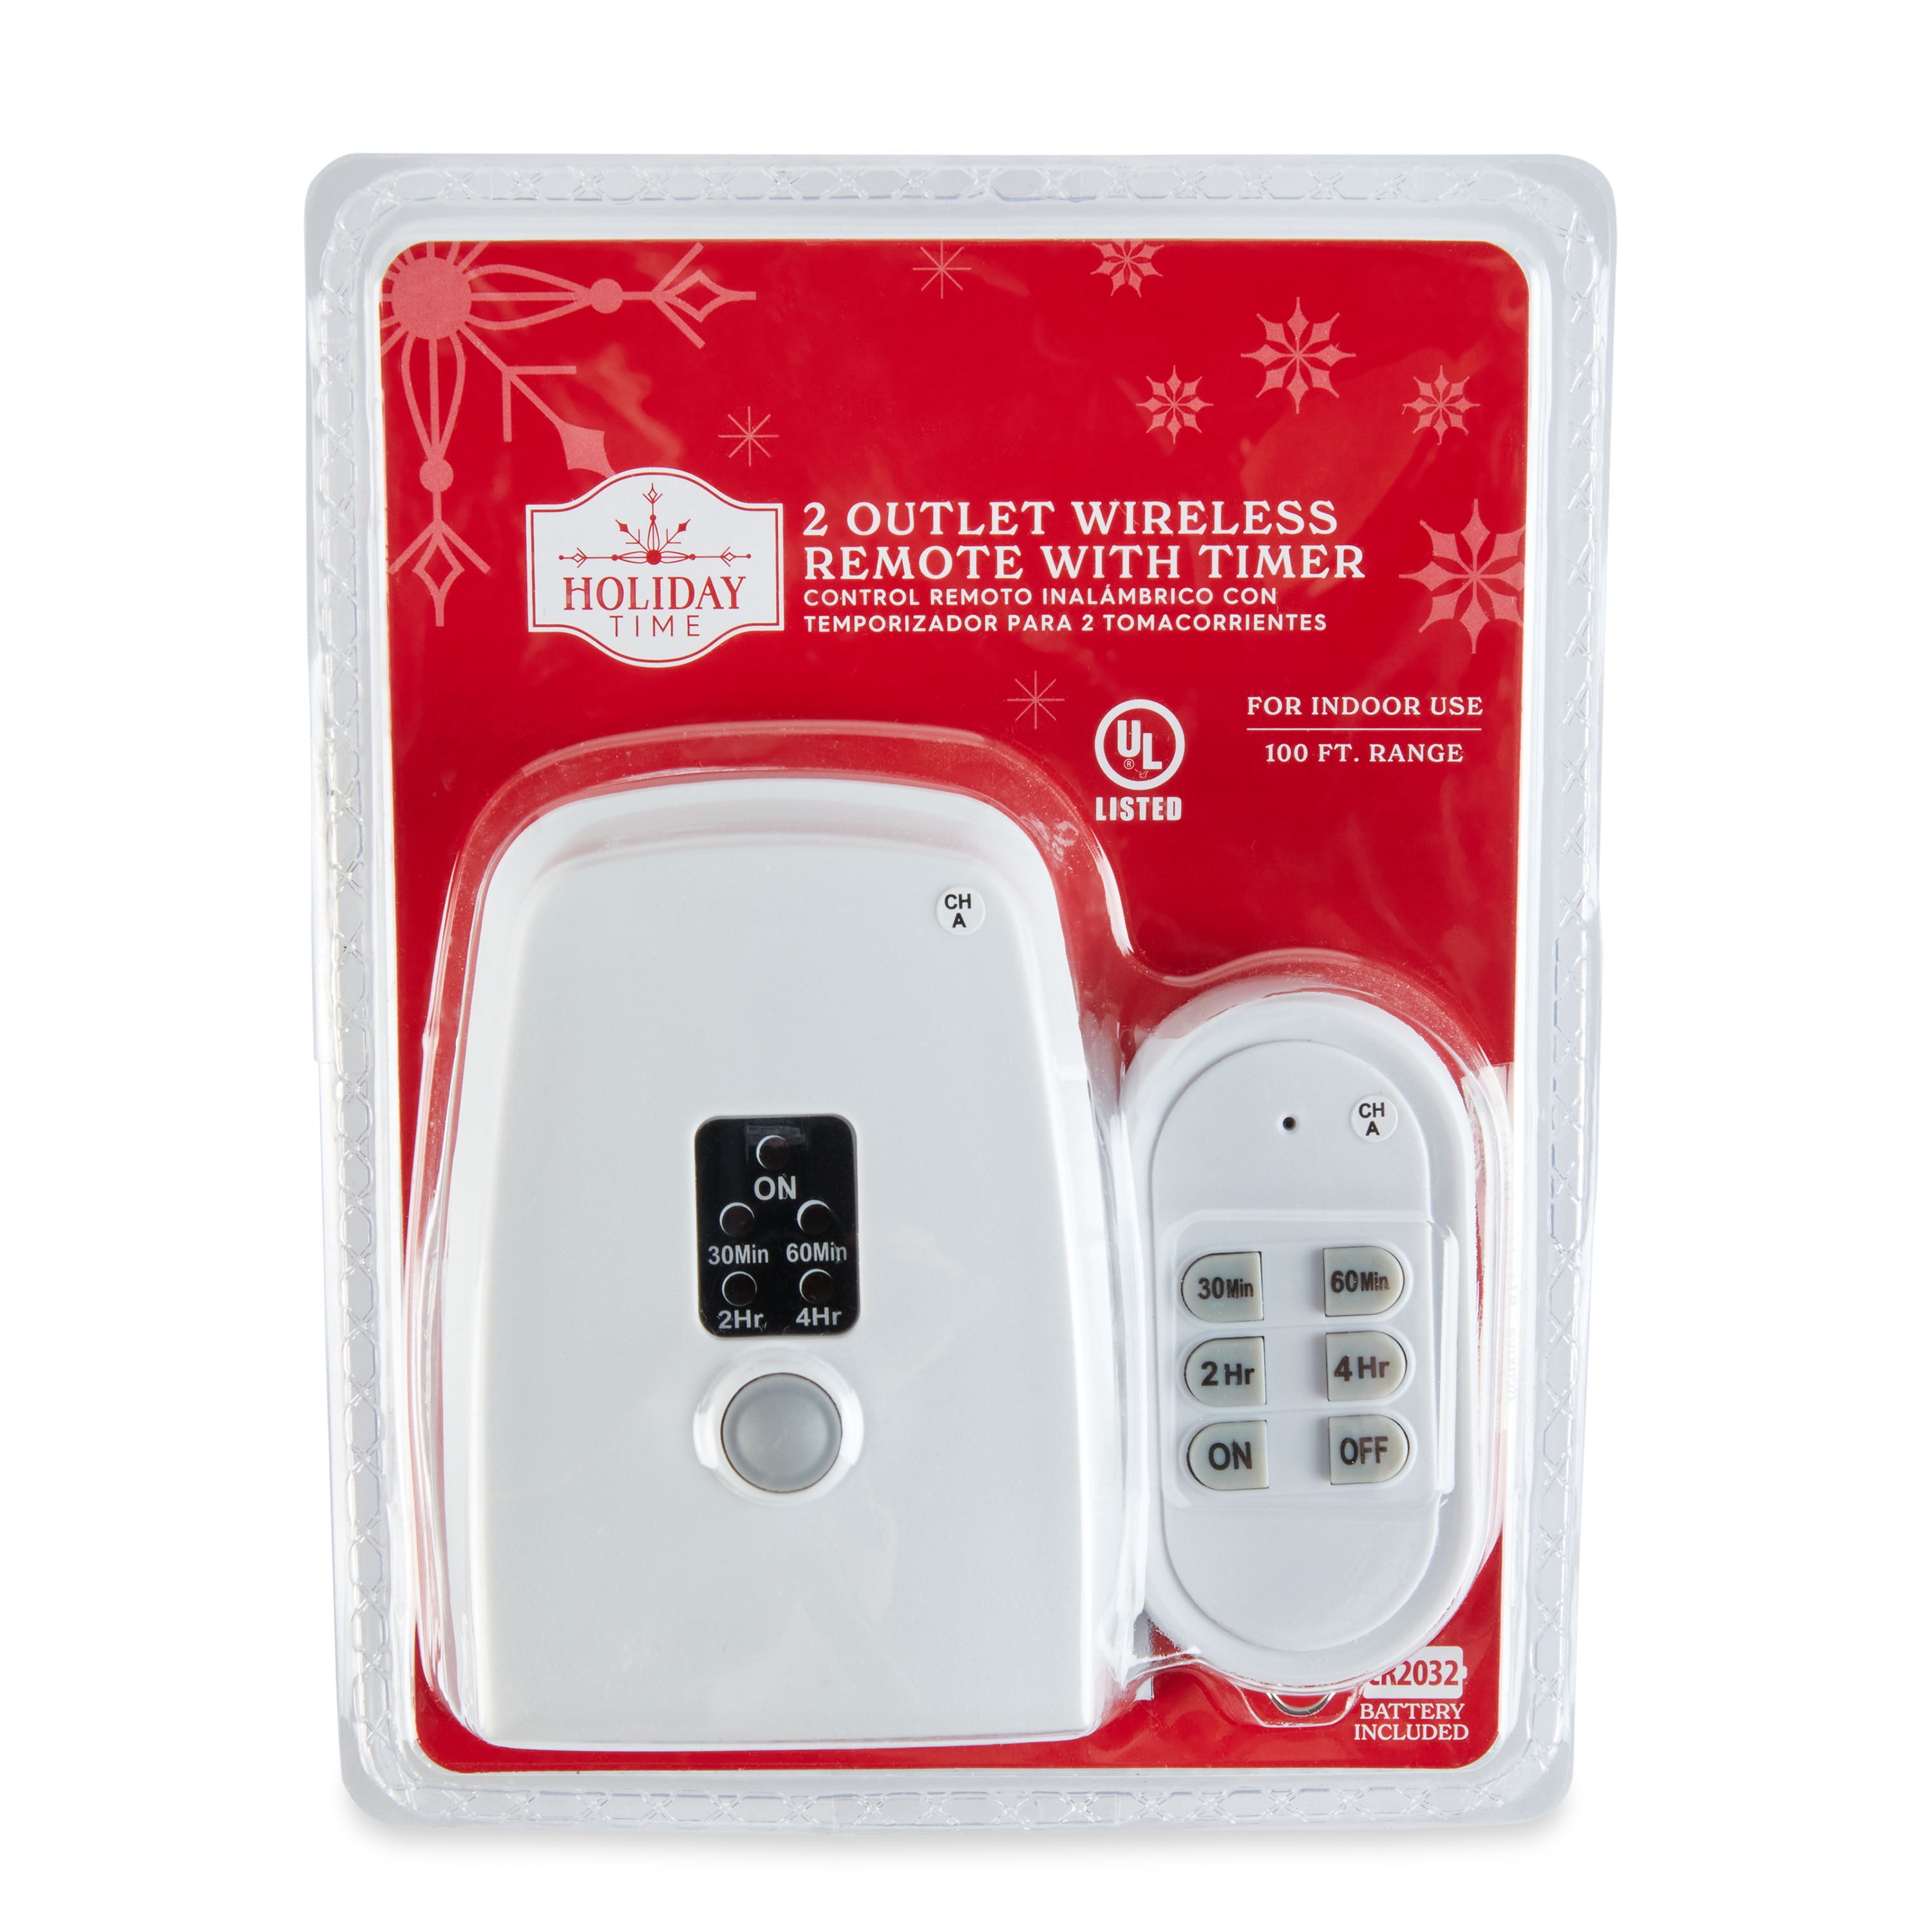 White Gator Outdoor Smart 2 Sockets Wifi-Wireless Remote Control Timer &  on/off with App